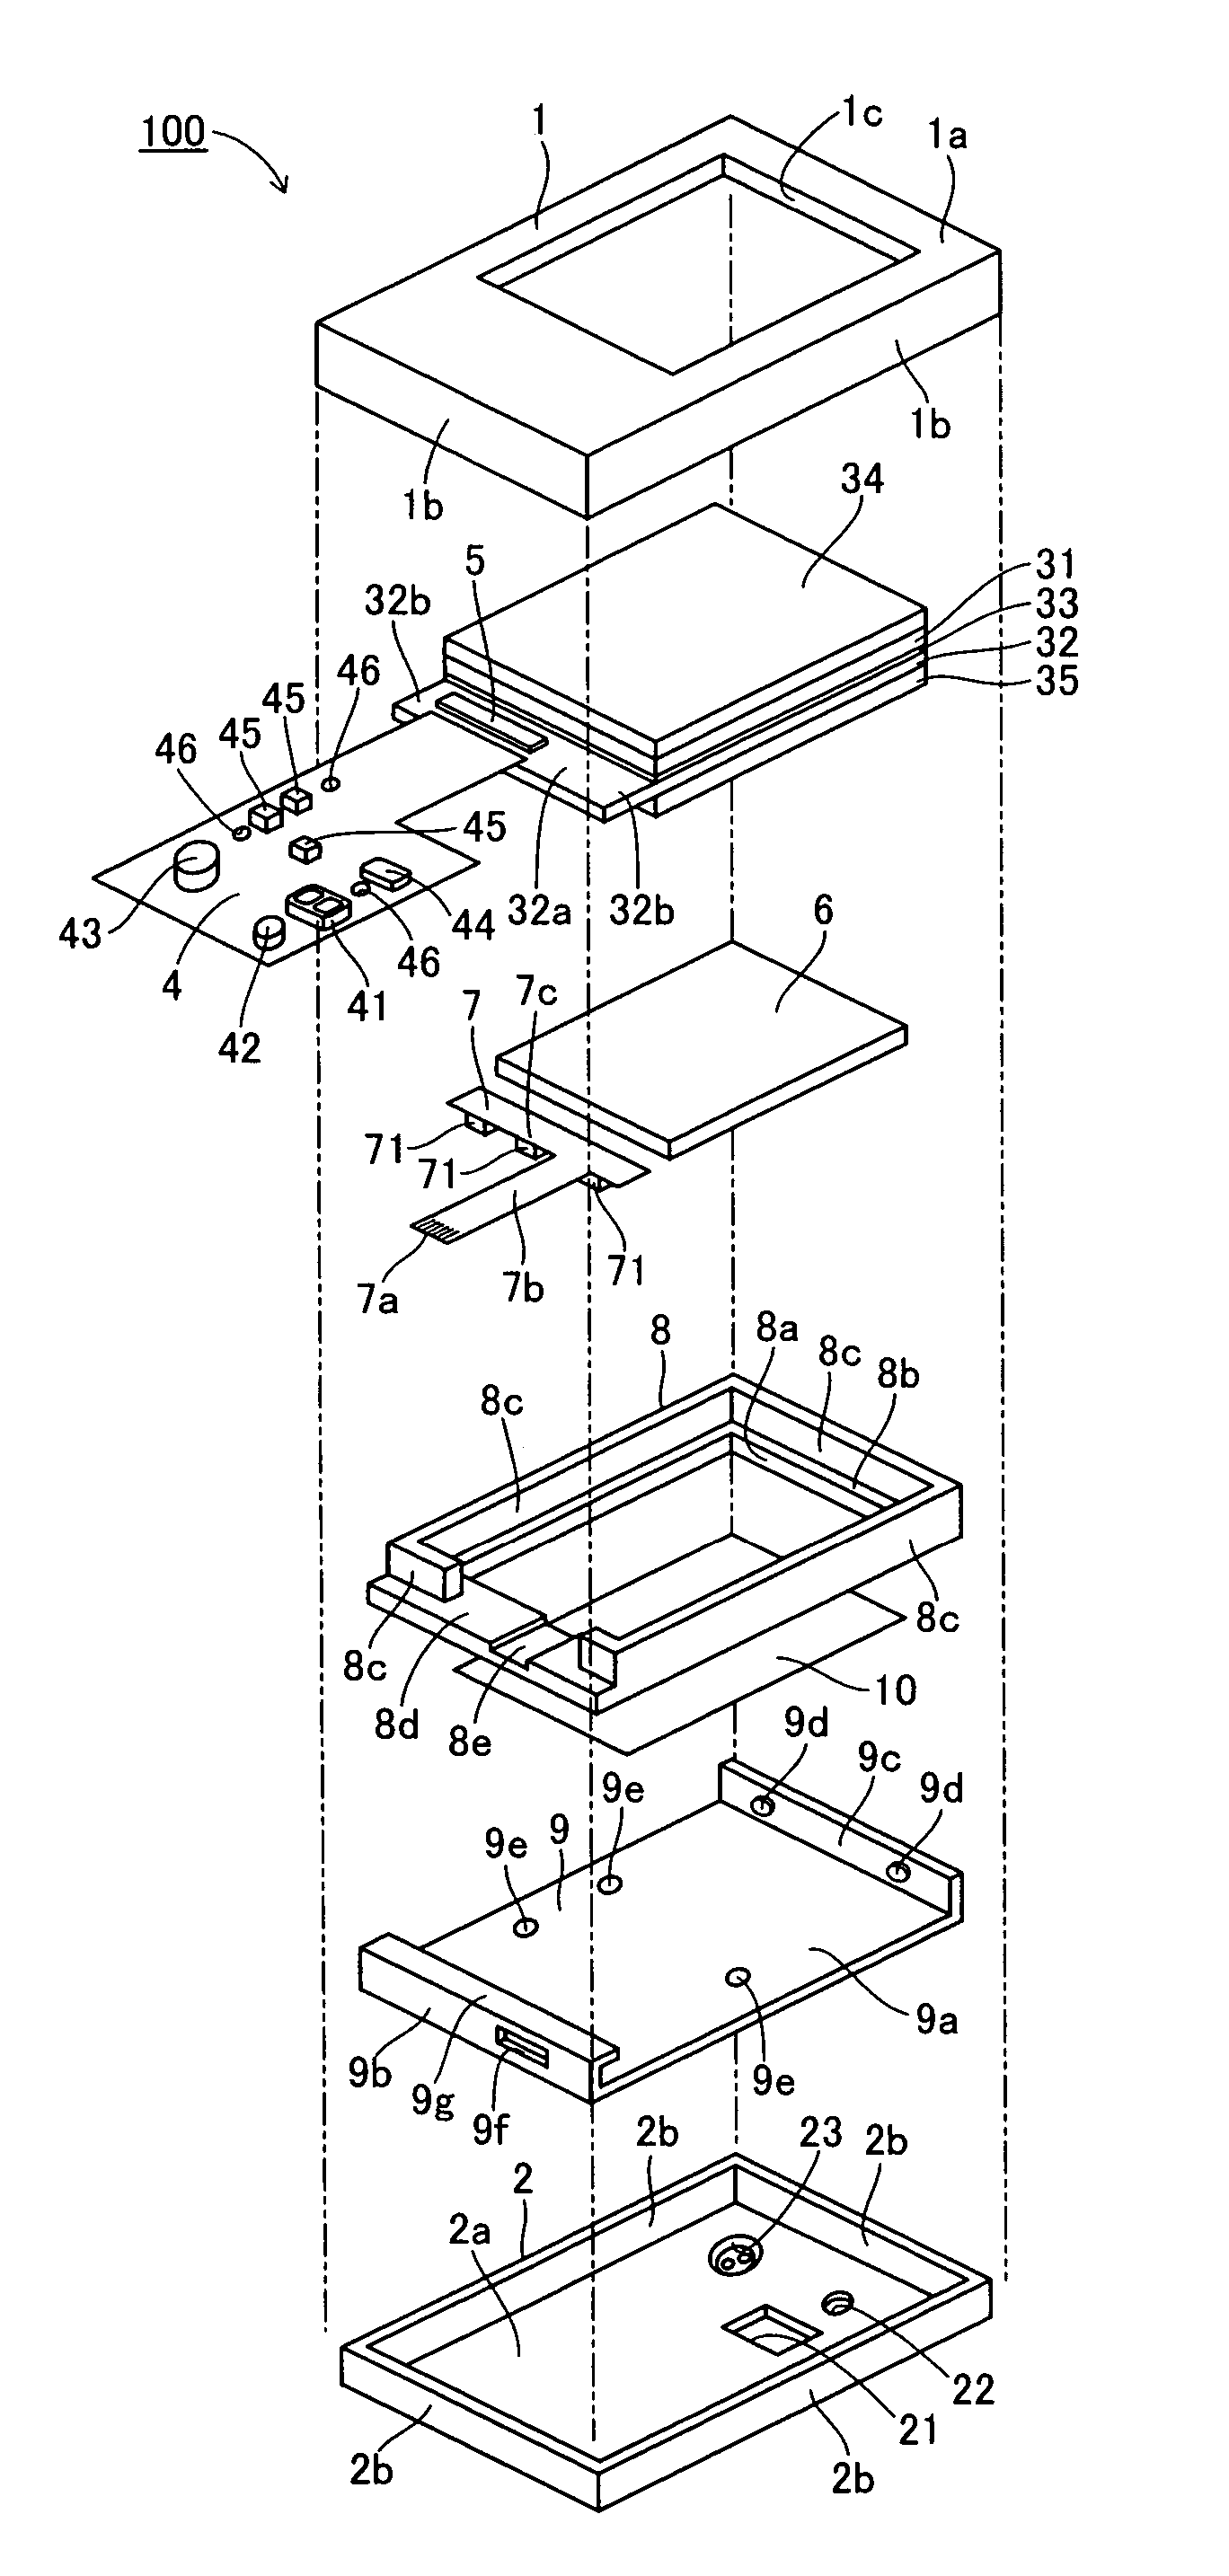 Display and portable device